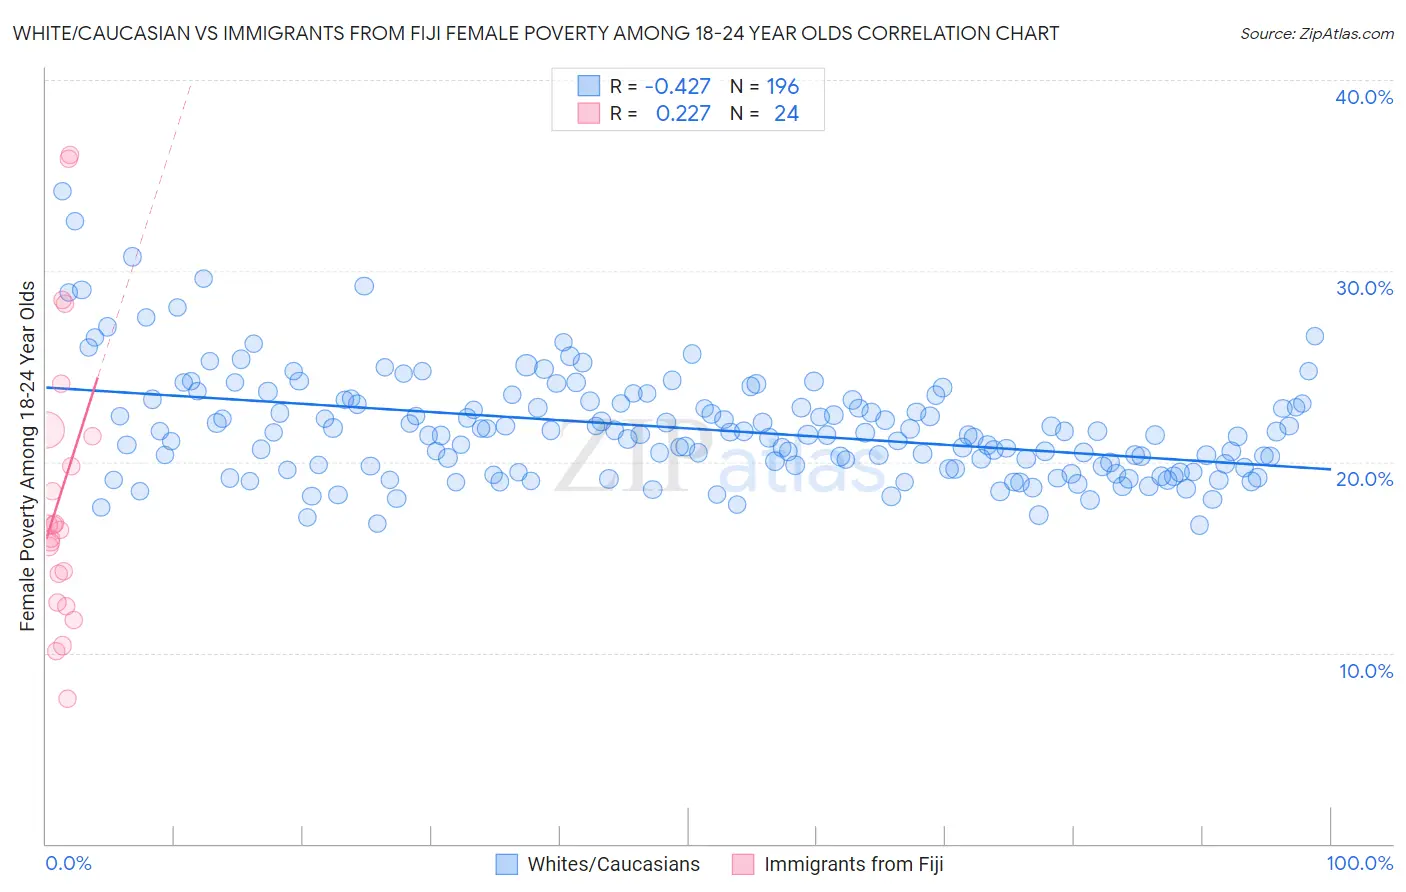 White/Caucasian vs Immigrants from Fiji Female Poverty Among 18-24 Year Olds